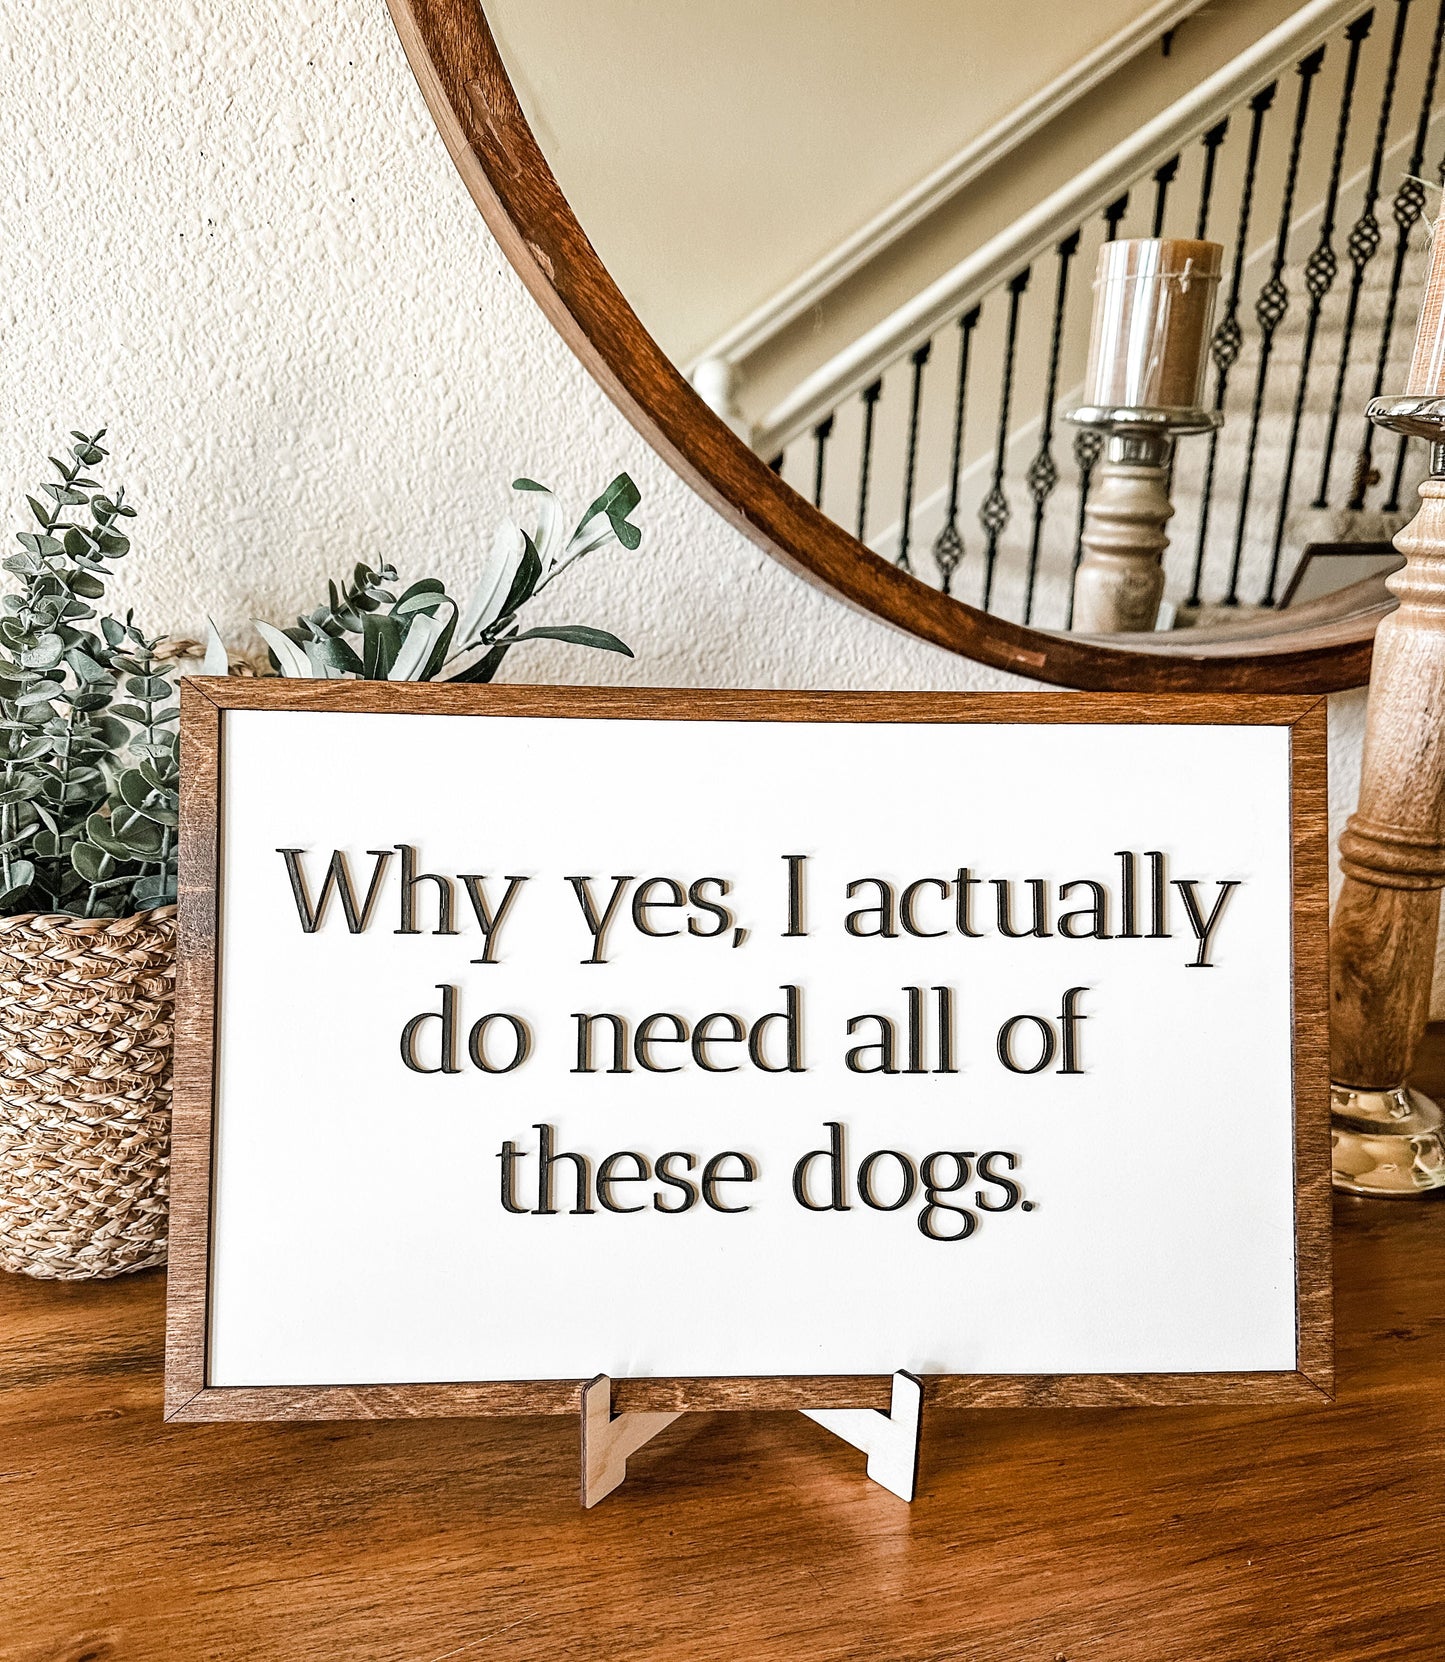 Need dogs? Wall sign